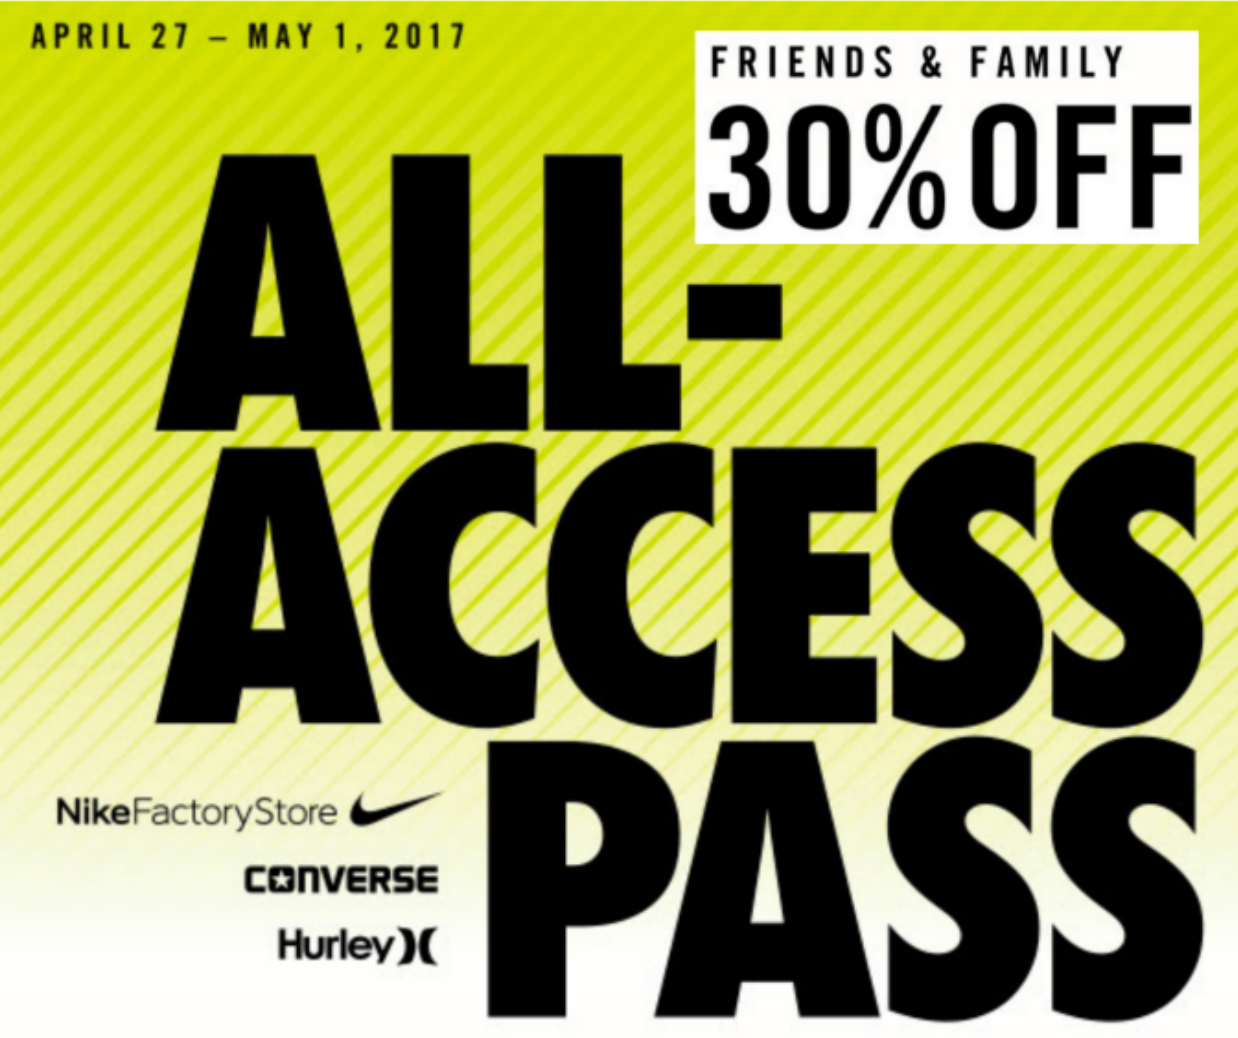 Nike, Converse & Hurley Factory Stores Possible 30 Off Purchase